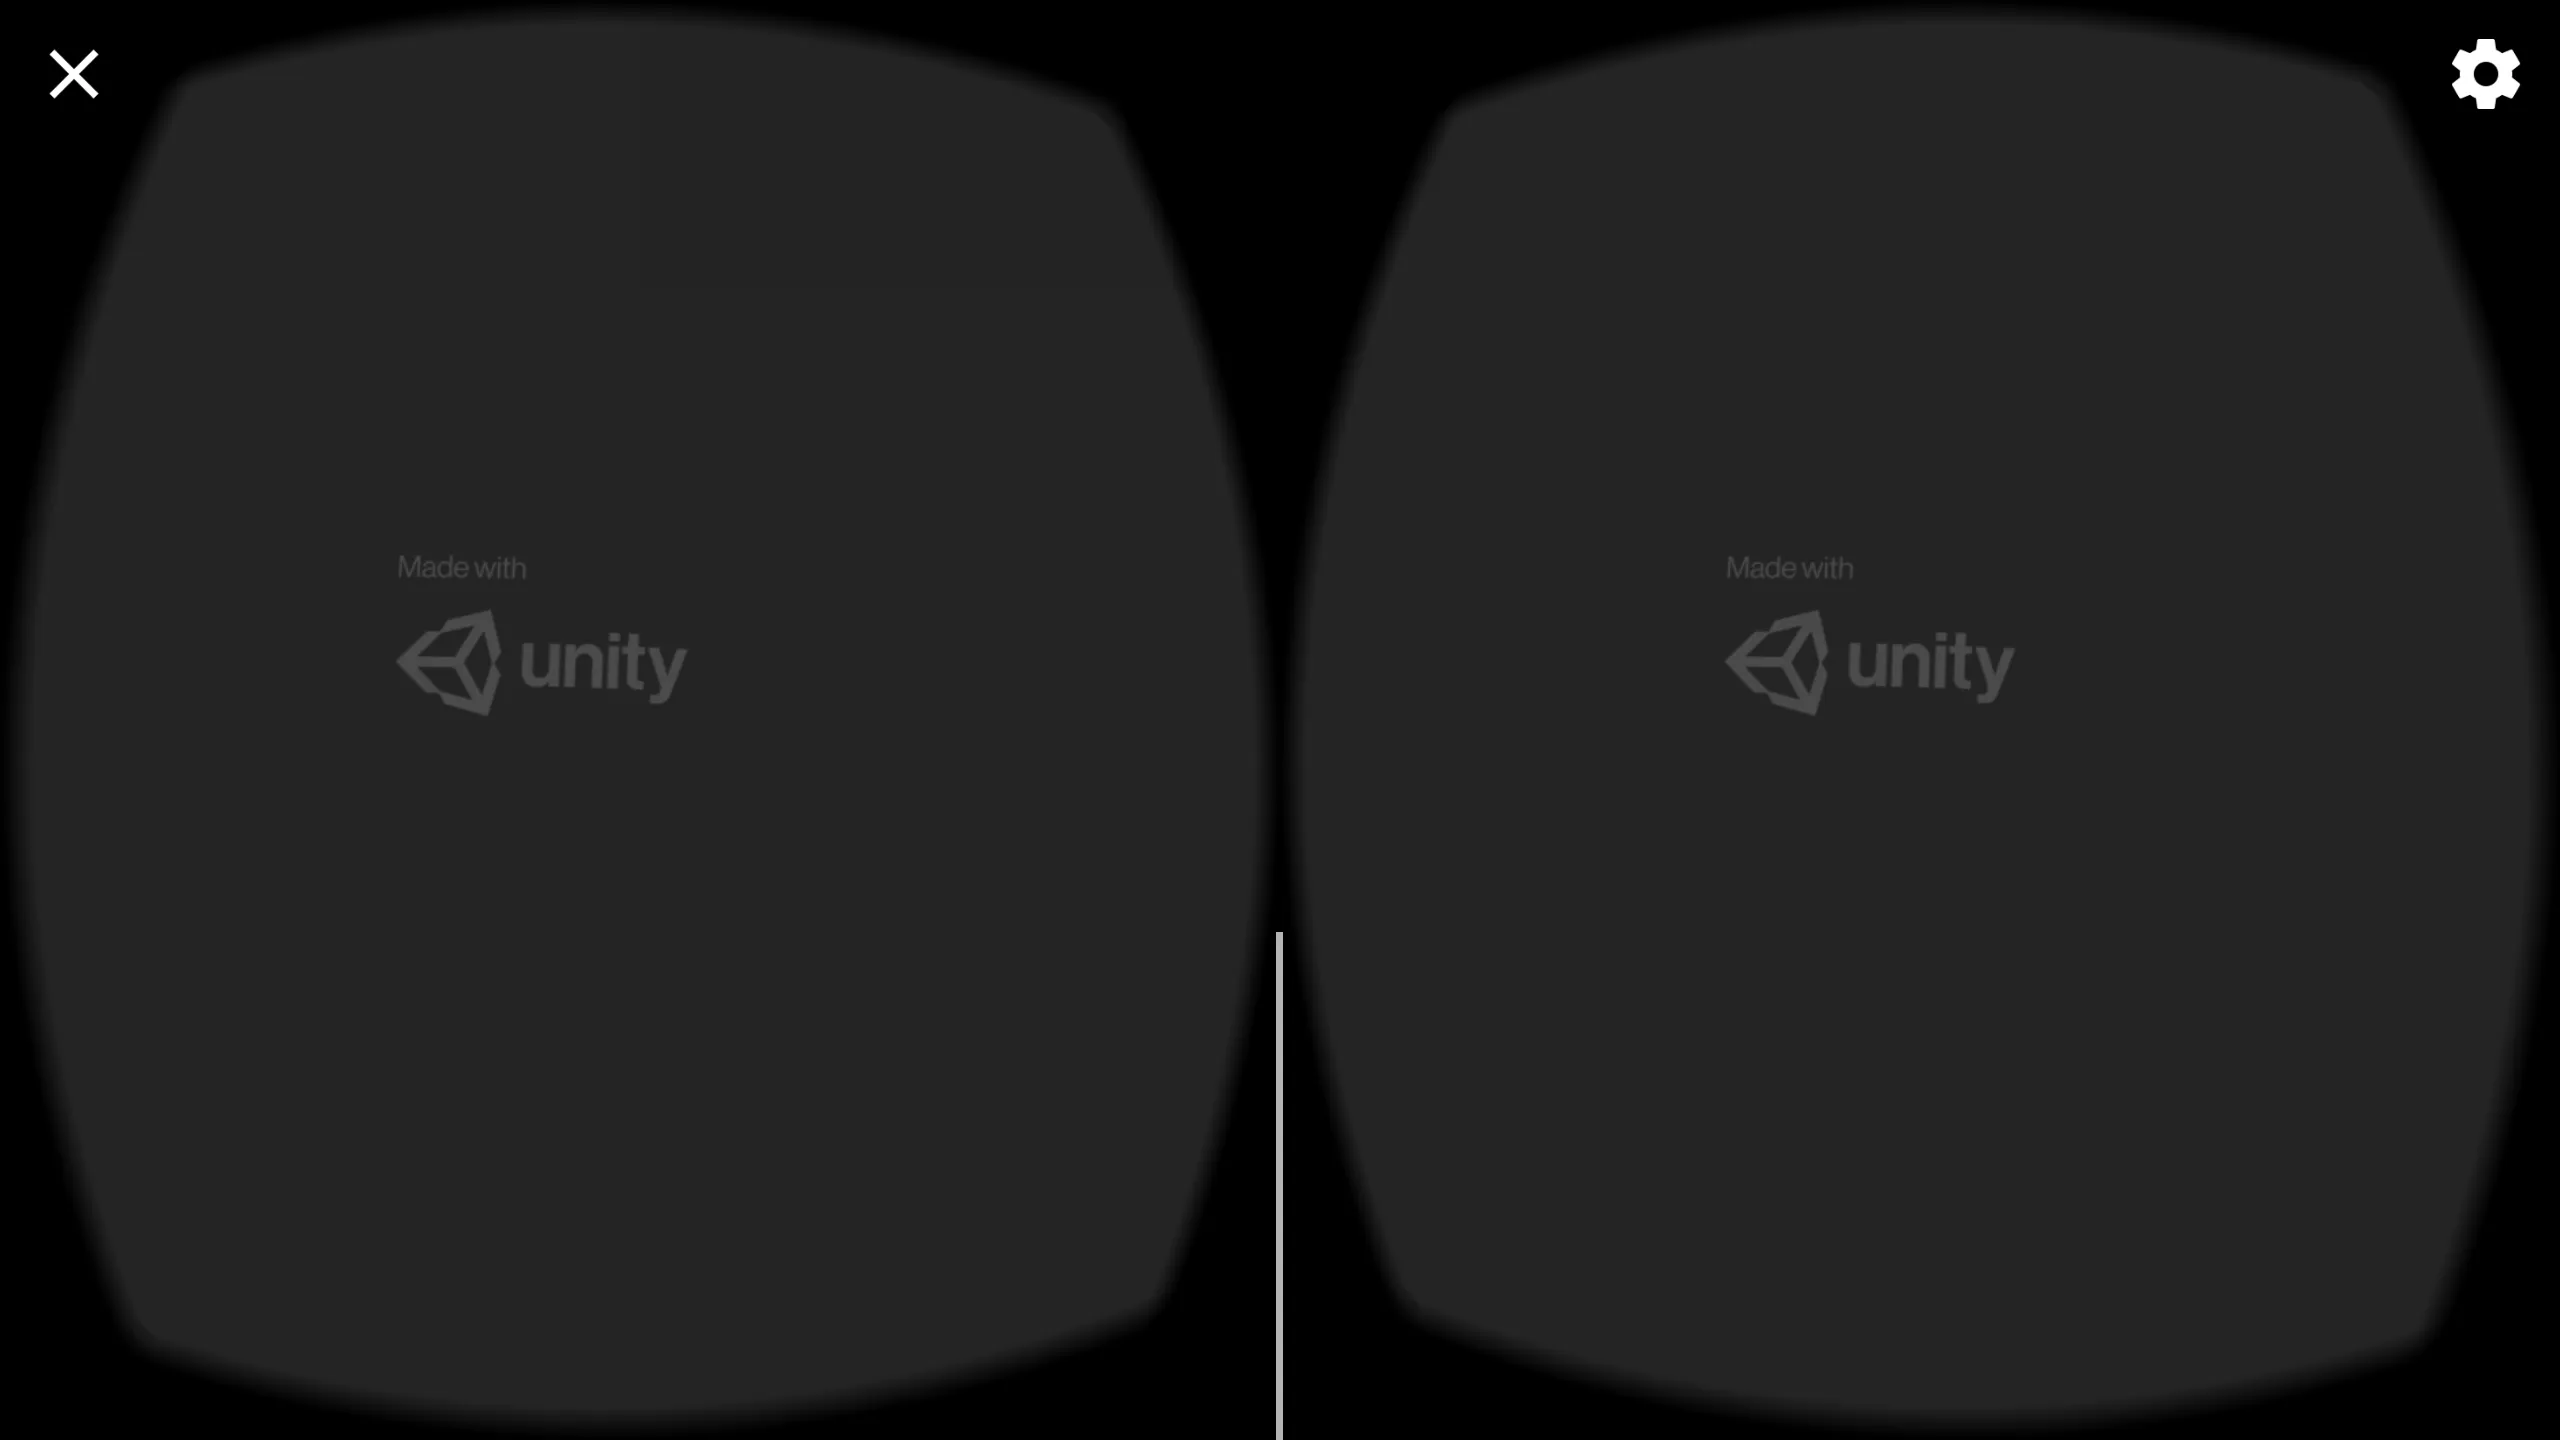 unity opening in stereo mode